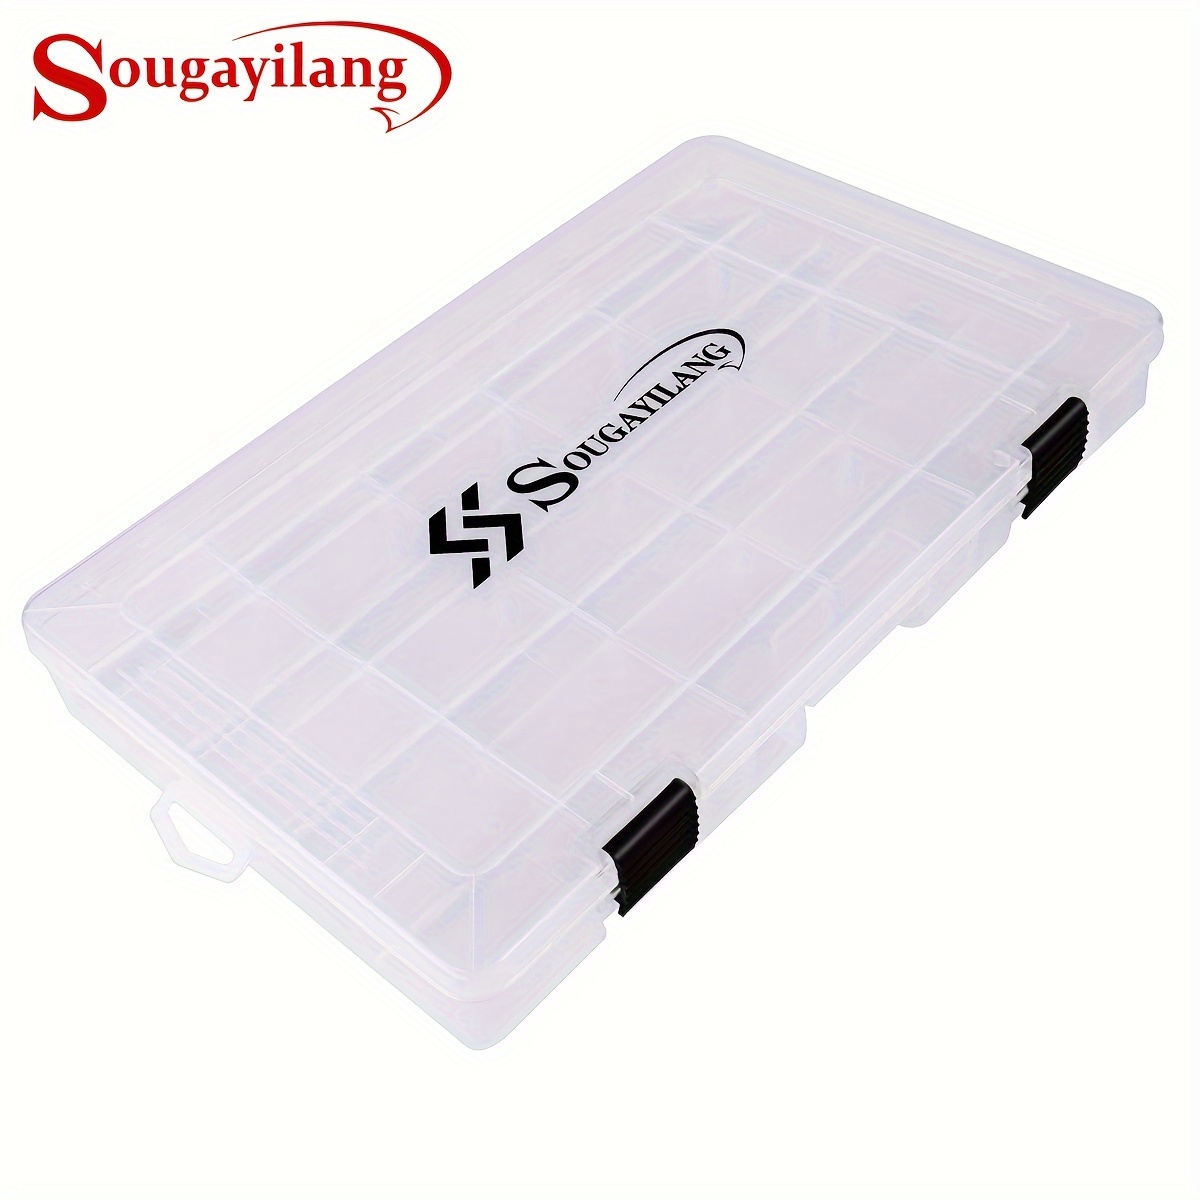 

Sougayilang 1pc 24 Grids/18 Grids Plastic Fishing Lure Bait Storage Box, Fishing Accessories Box, With Adjustable Dividers, Fishing Gear